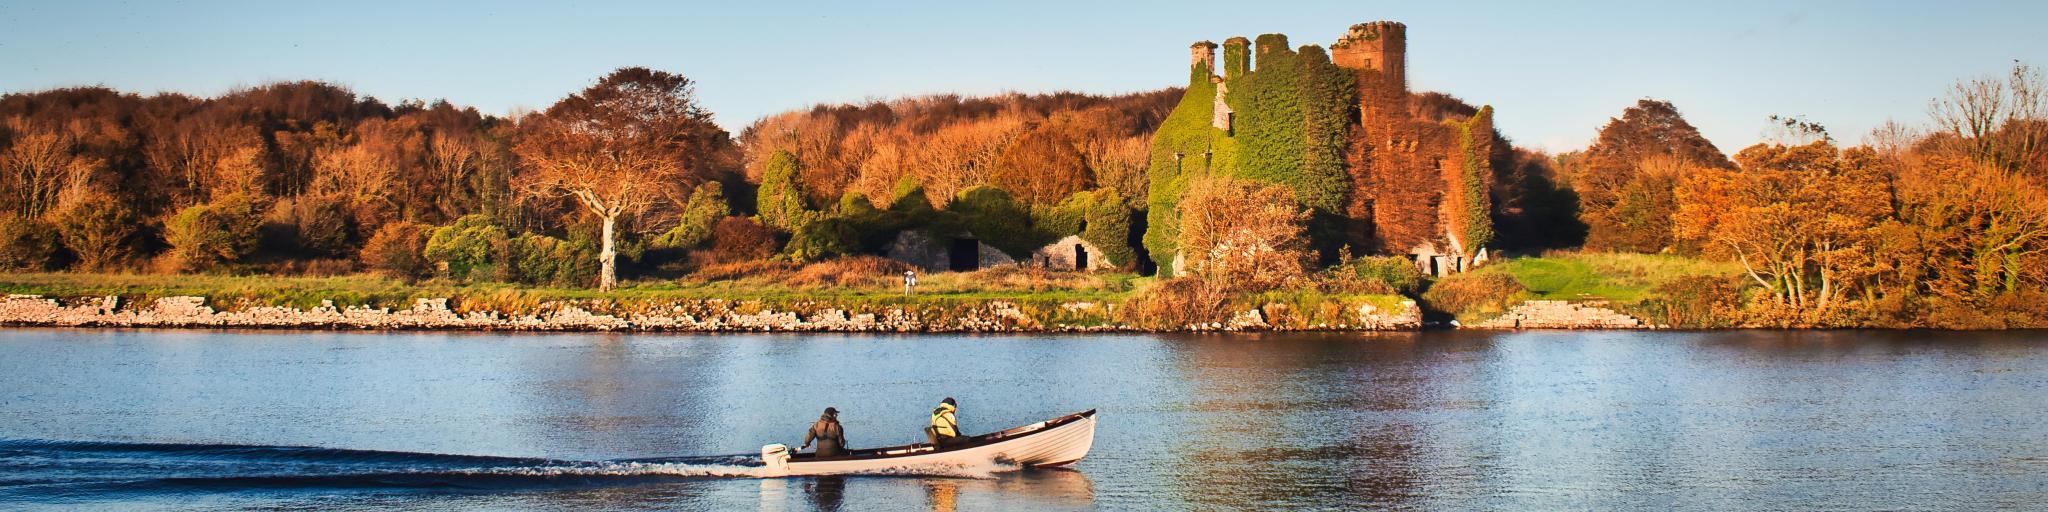 Beautiful scenery of Menlo castle surrounded by a autumn colored trees and boat passing by in Corrib river at Galway, Ireland